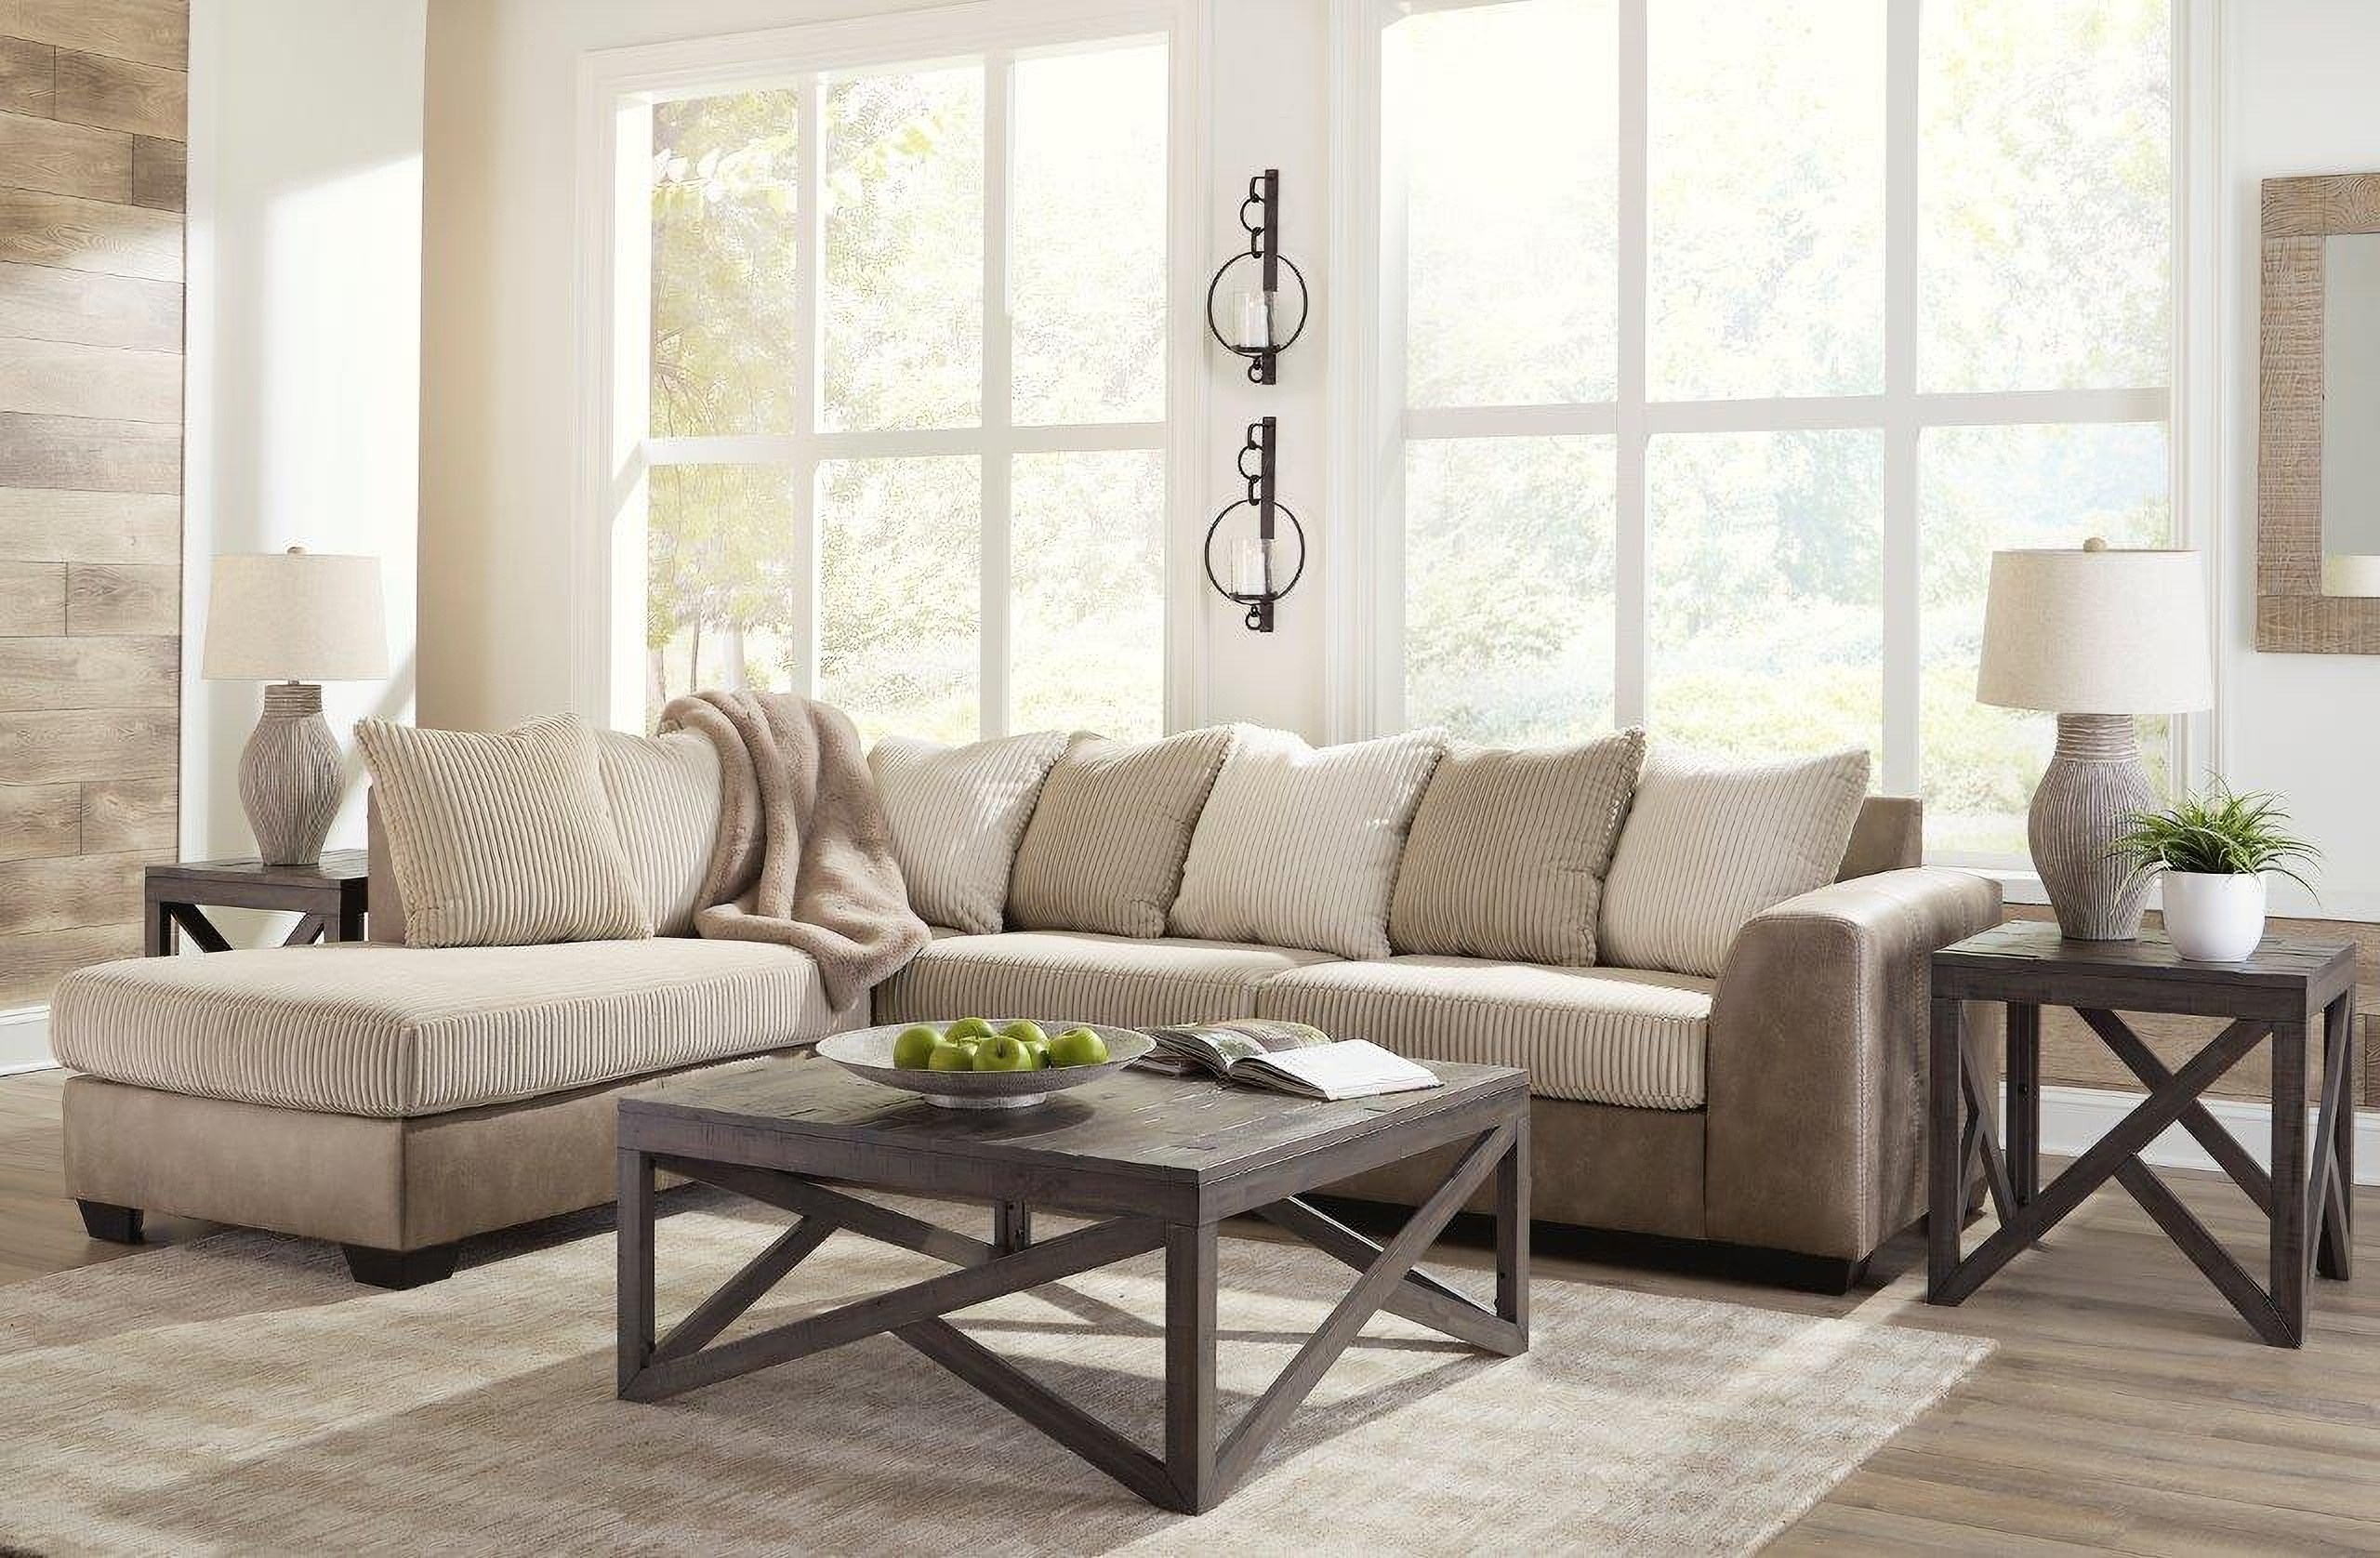 Keskin 2 Piece Laf Sectional In Sand By